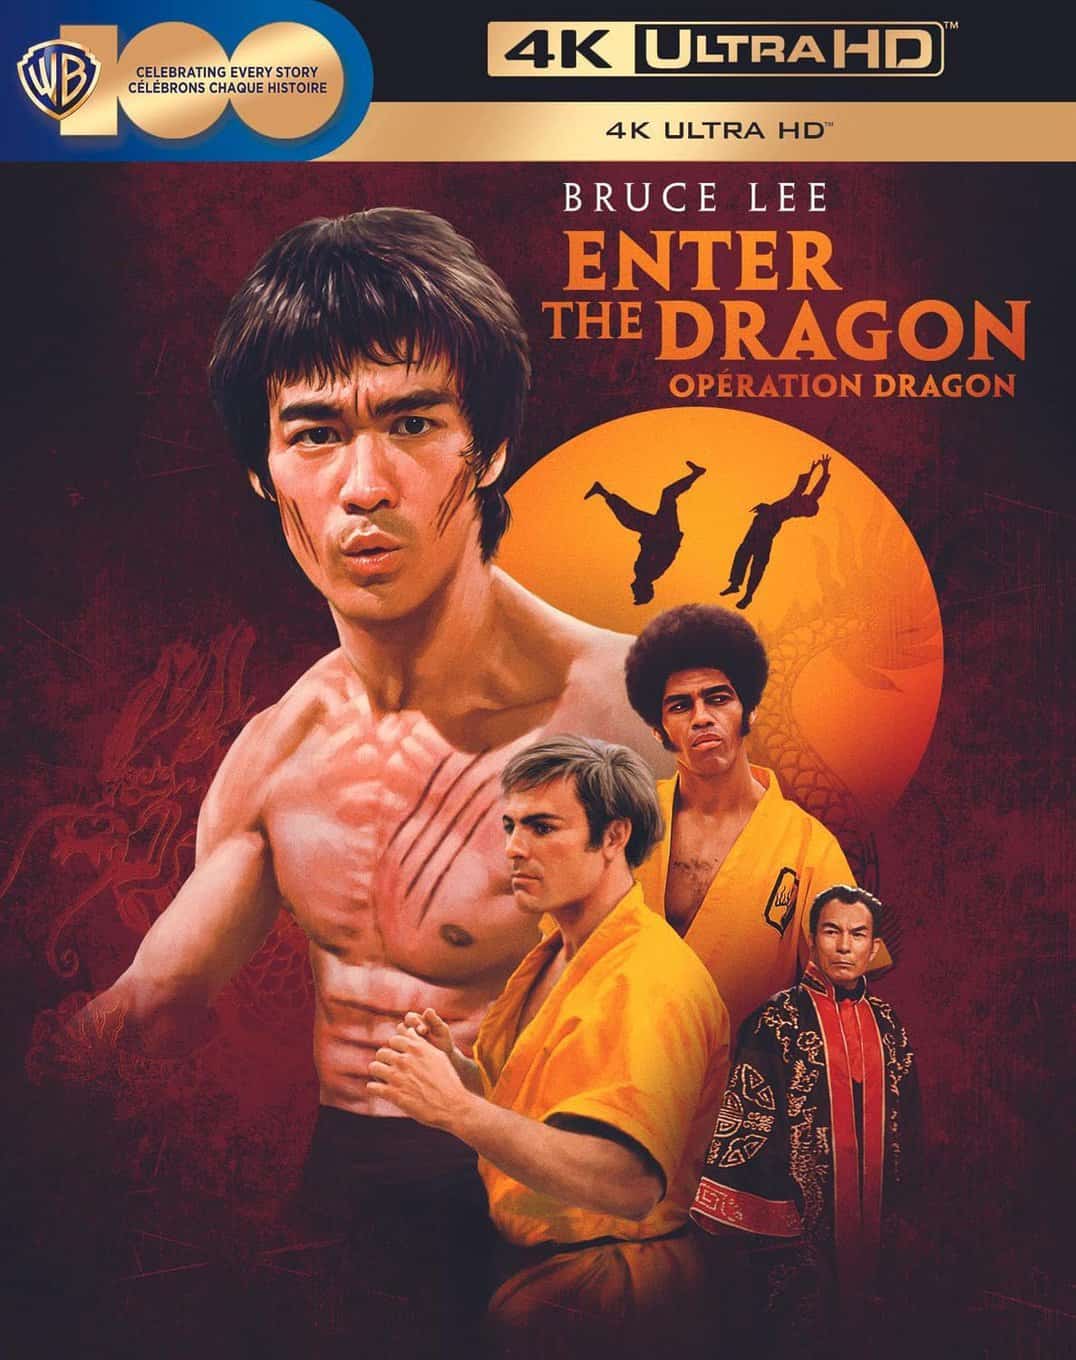 DOUBLE DRAGON Blu-ray Review